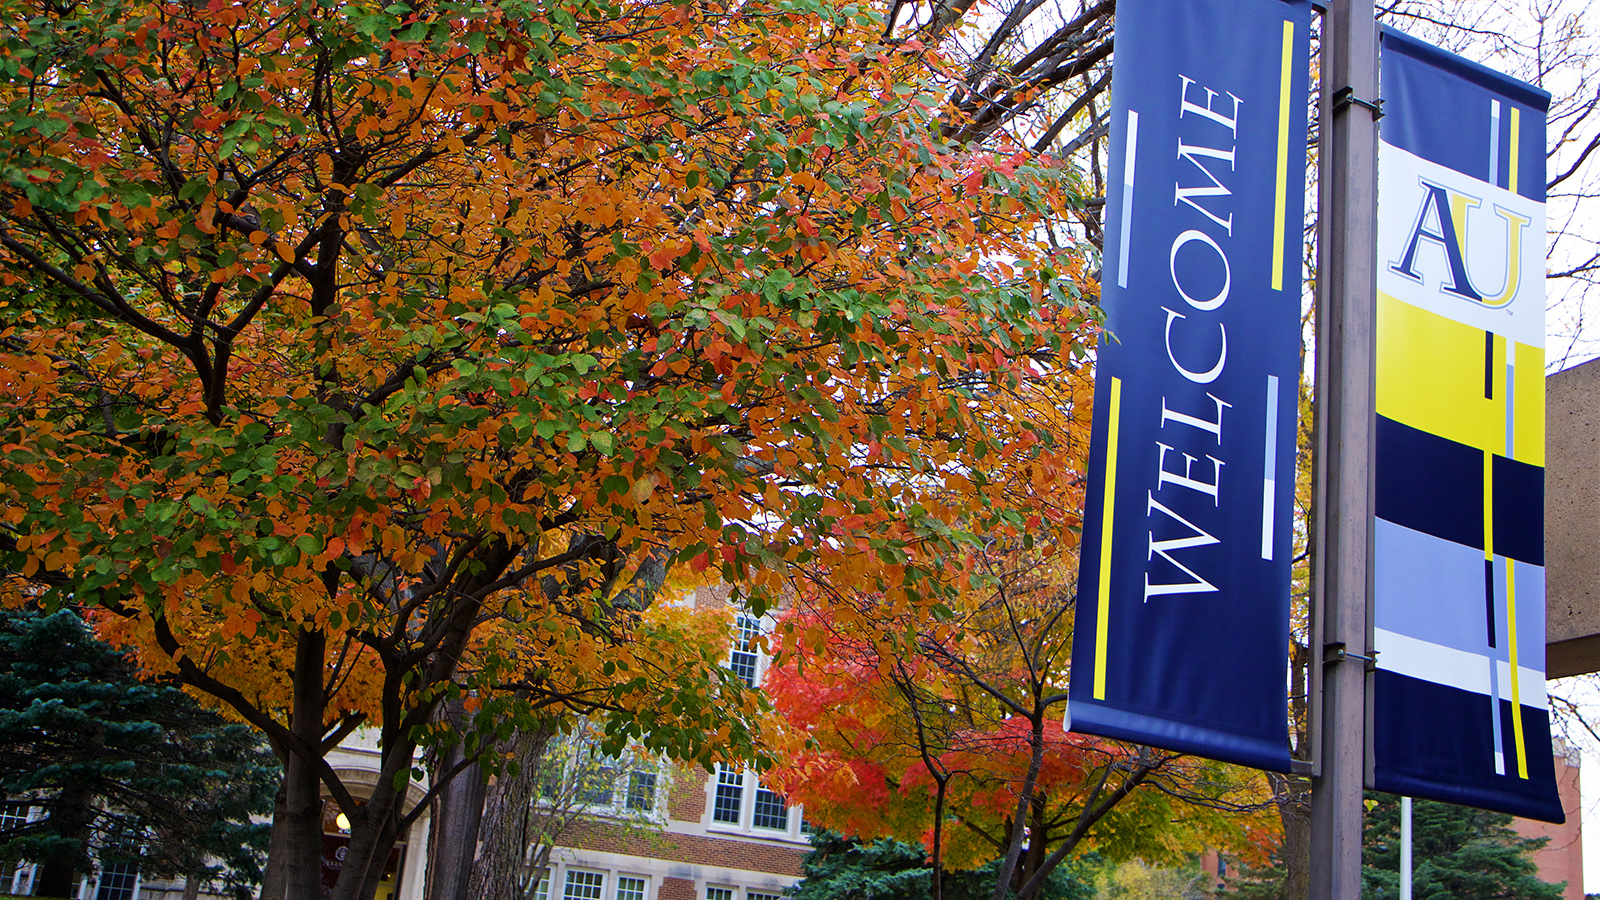 Augustana University offers more than 100 majors, minors and pre-professional programs.